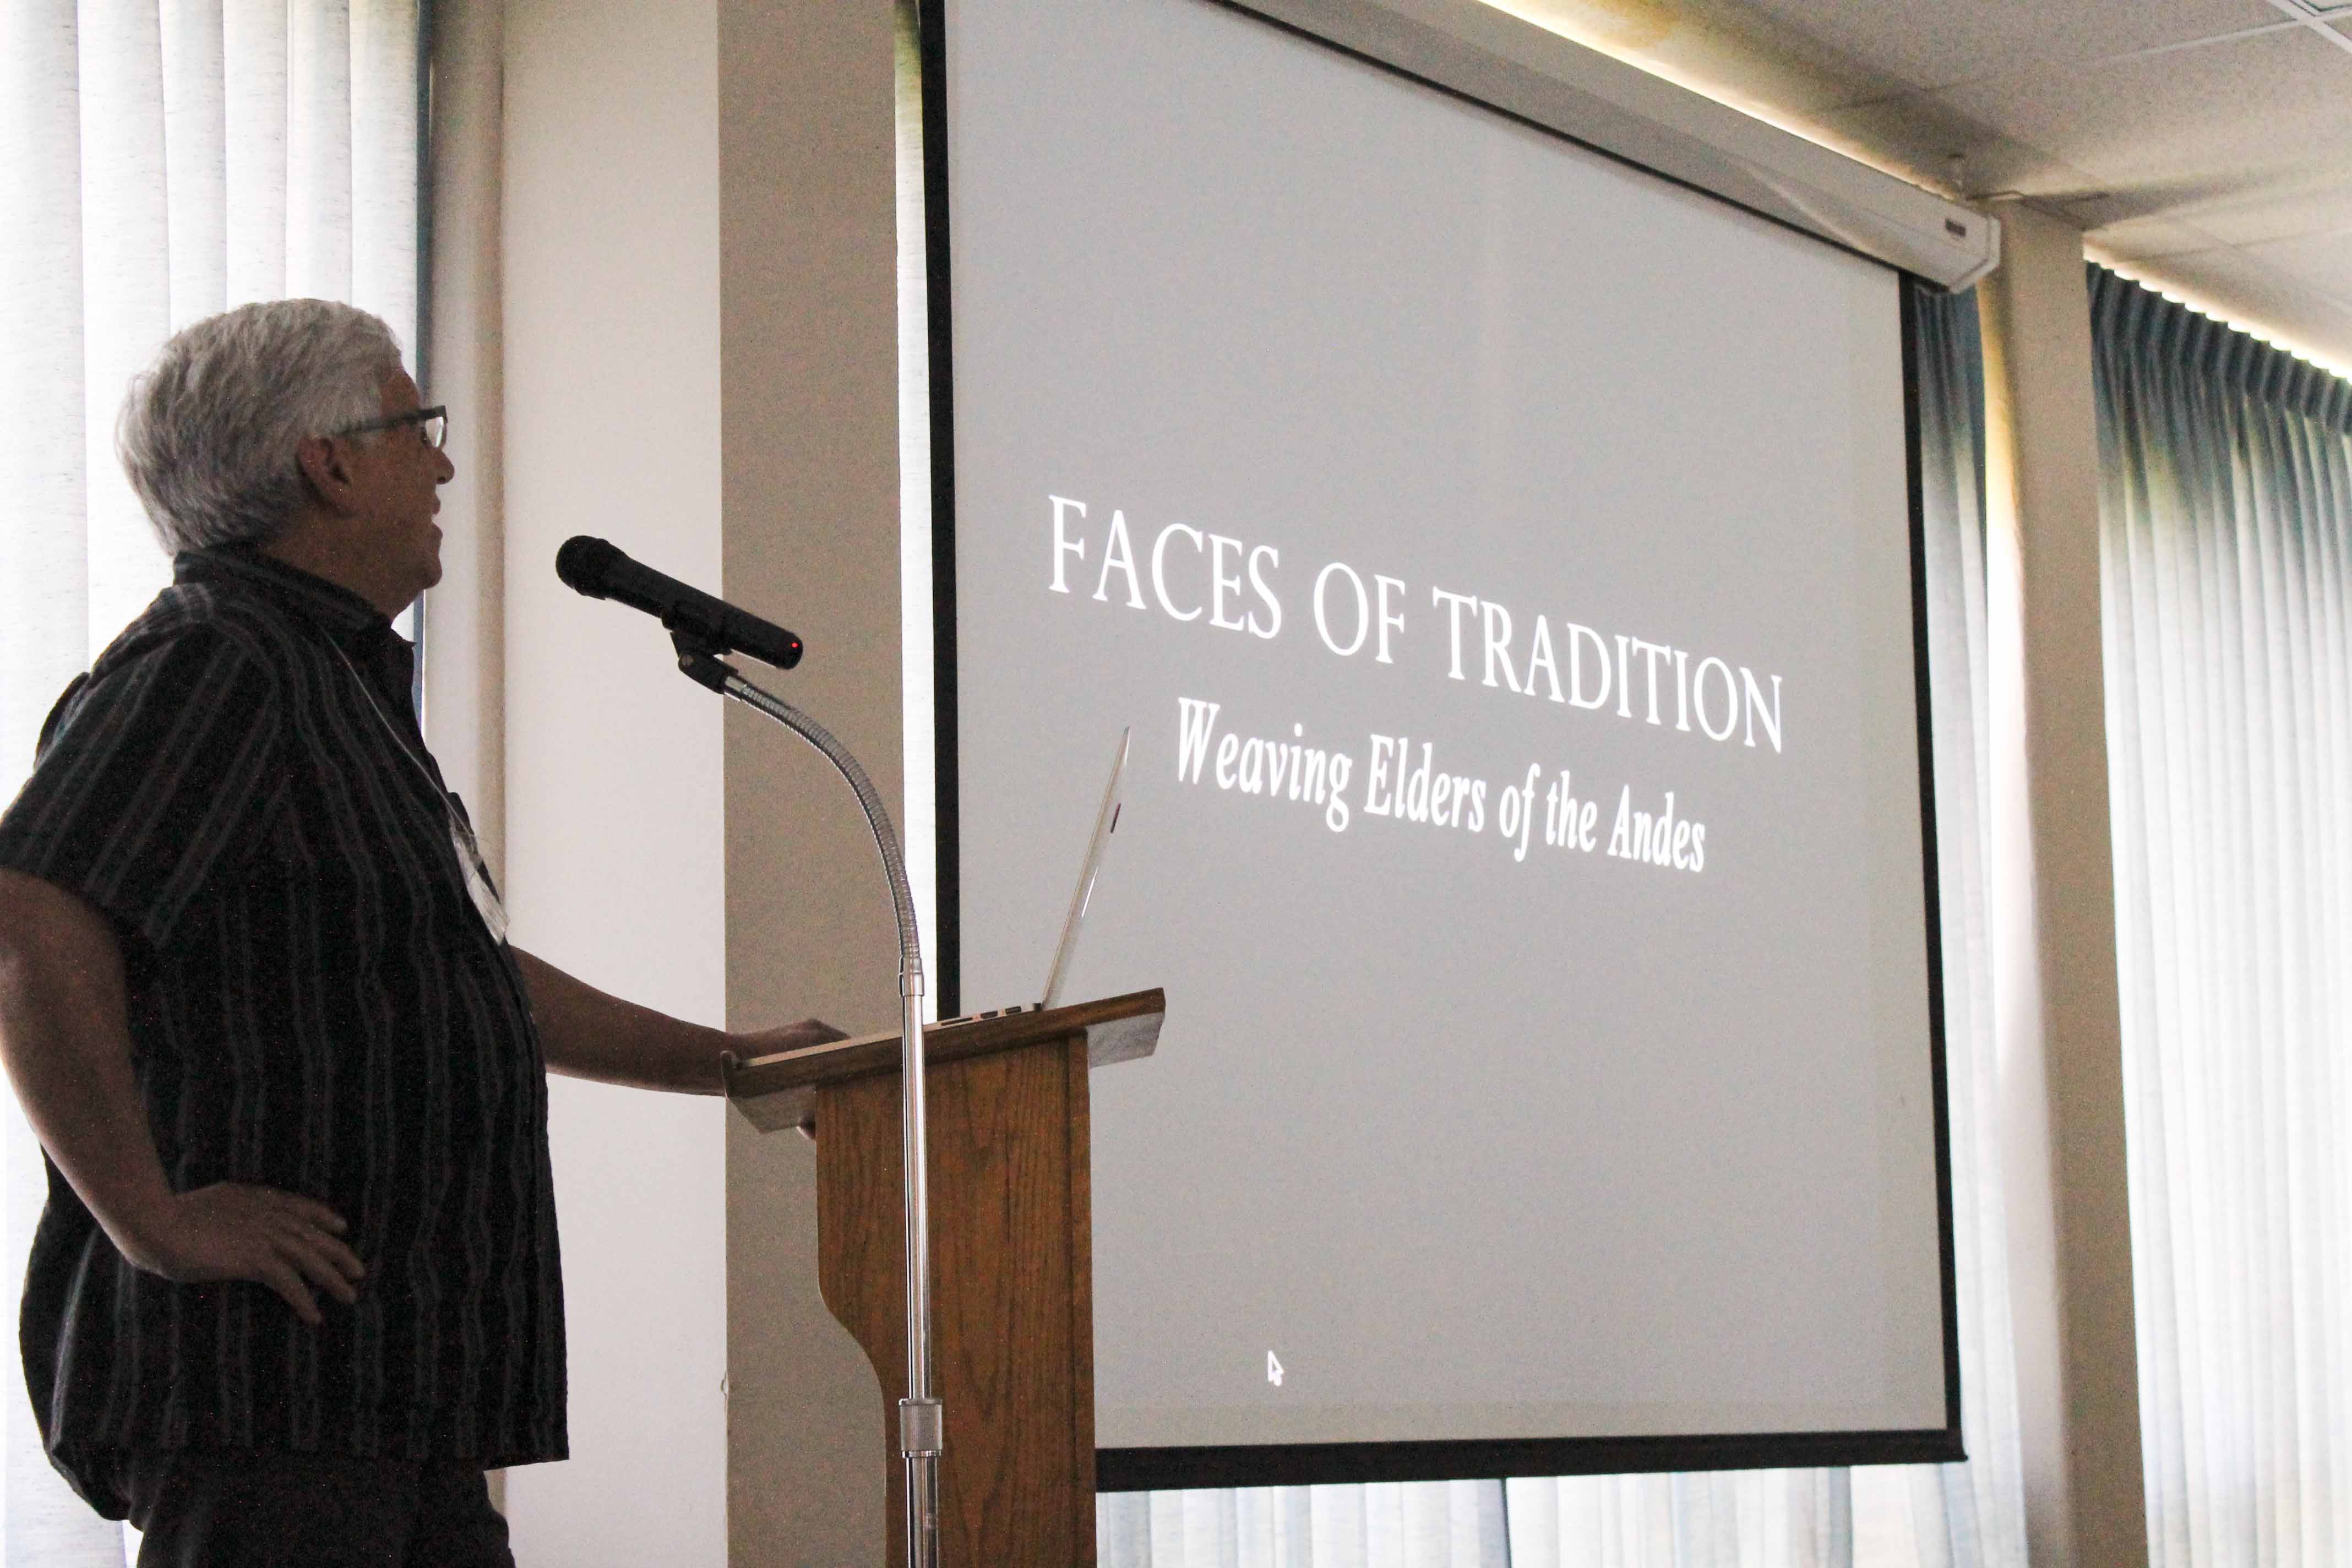 Joe Coca discusses the making of Faces of Tradition